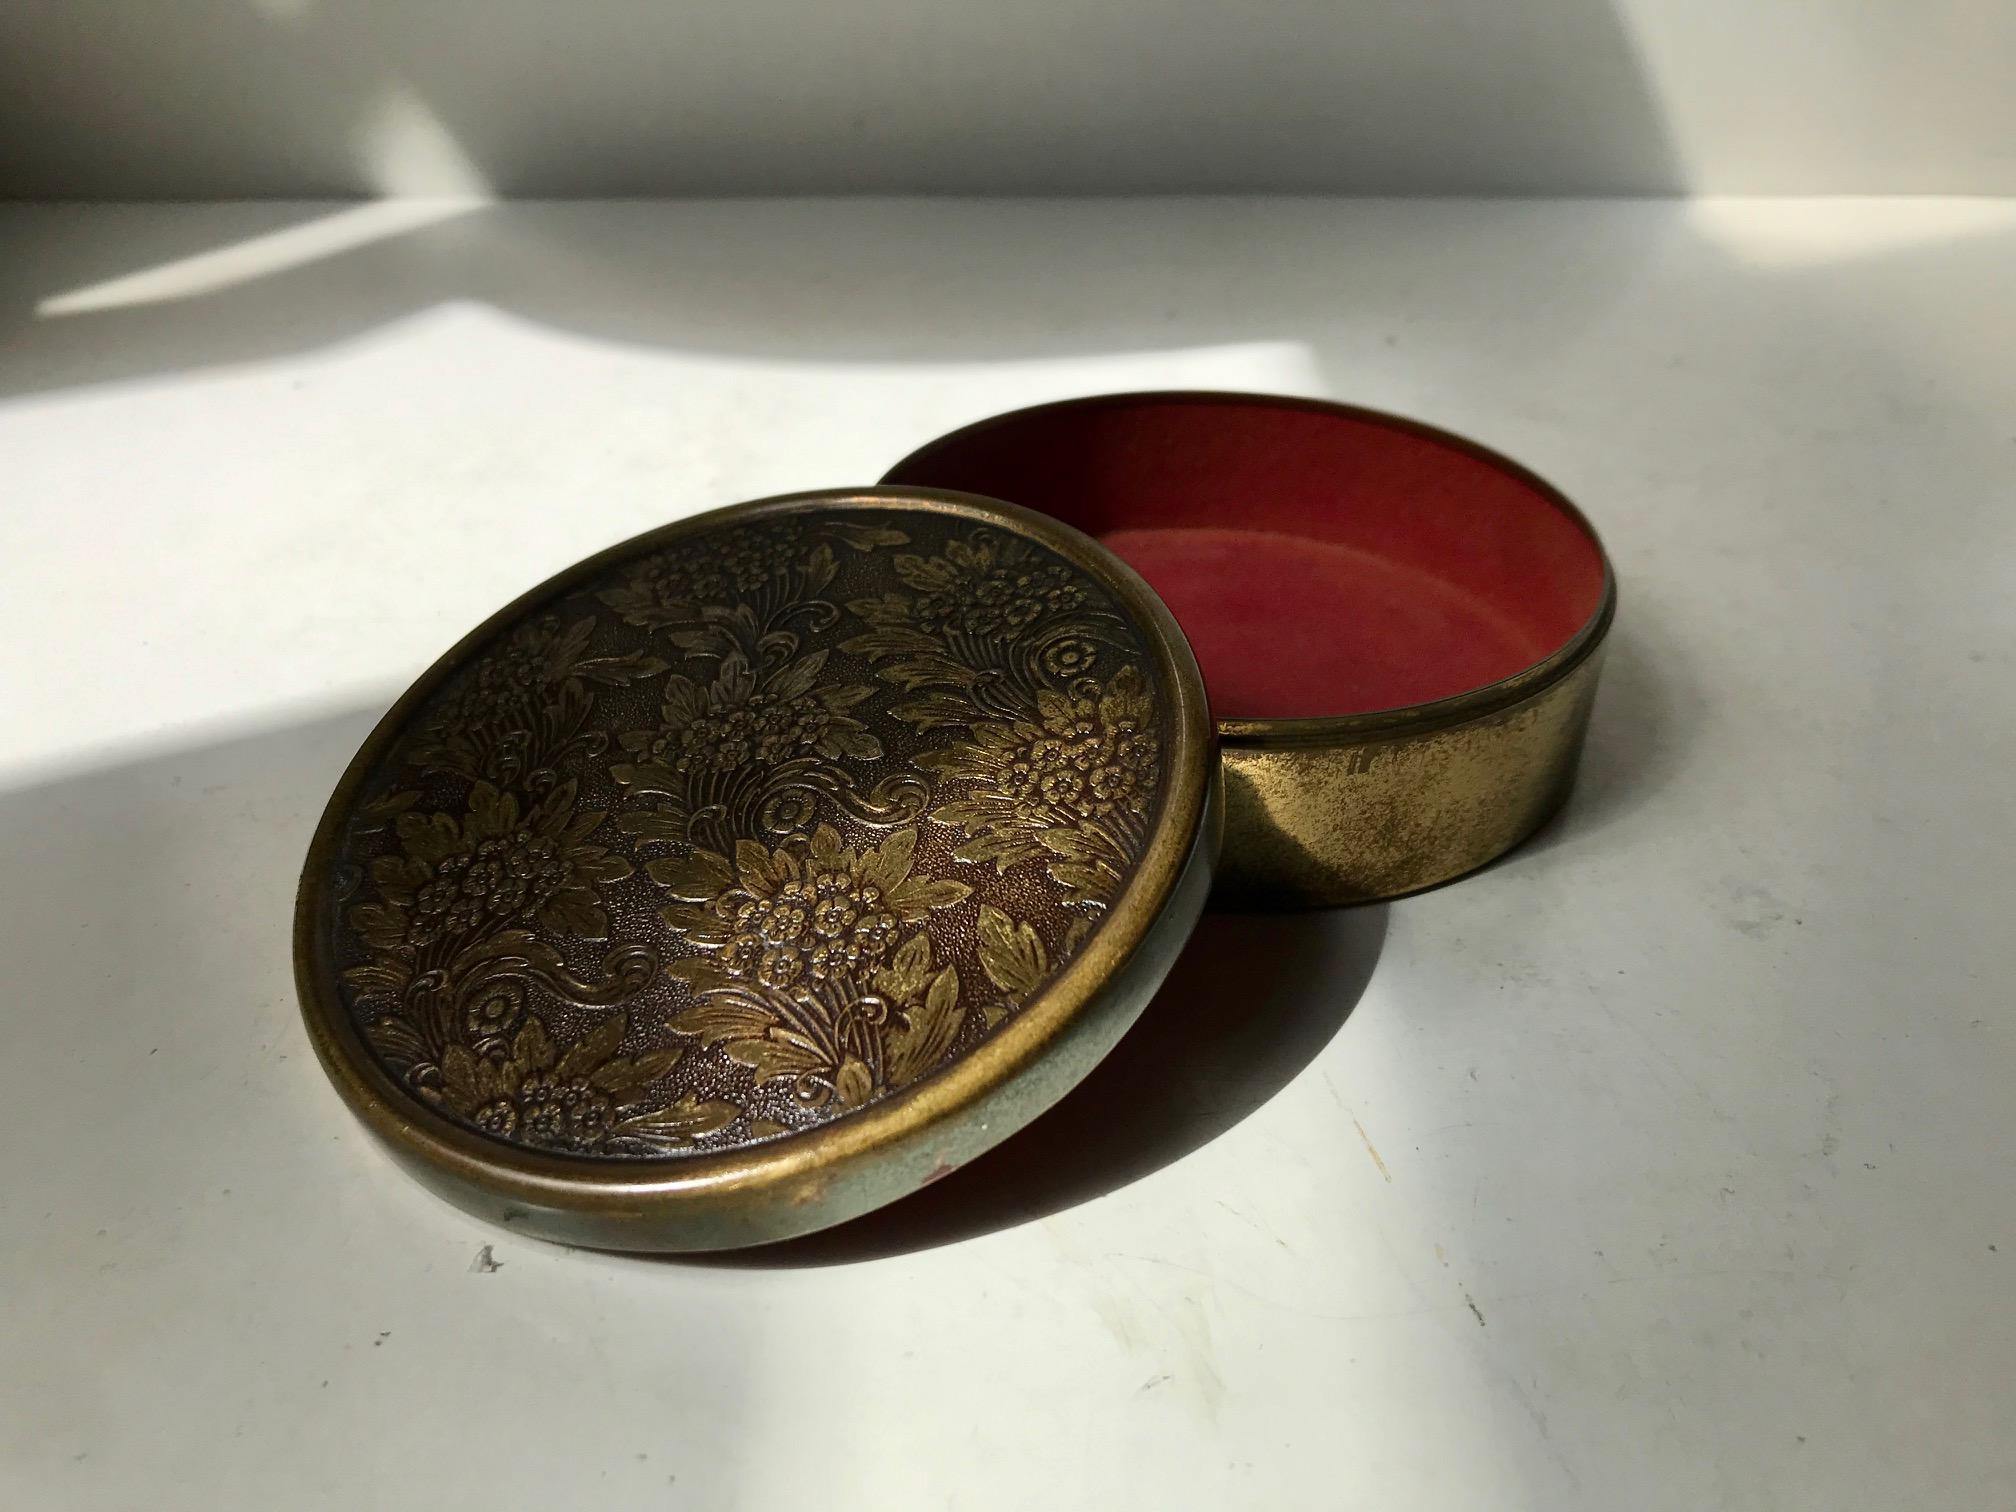 Japanese inspired jewelry trinket in bronze. The lid is hand- decorated/cut in relief depicting flowers. It has a red velvet interior slightly faded but original. This piece is marked Bronze and was made by an anonymous jeweler in Scandinavia during